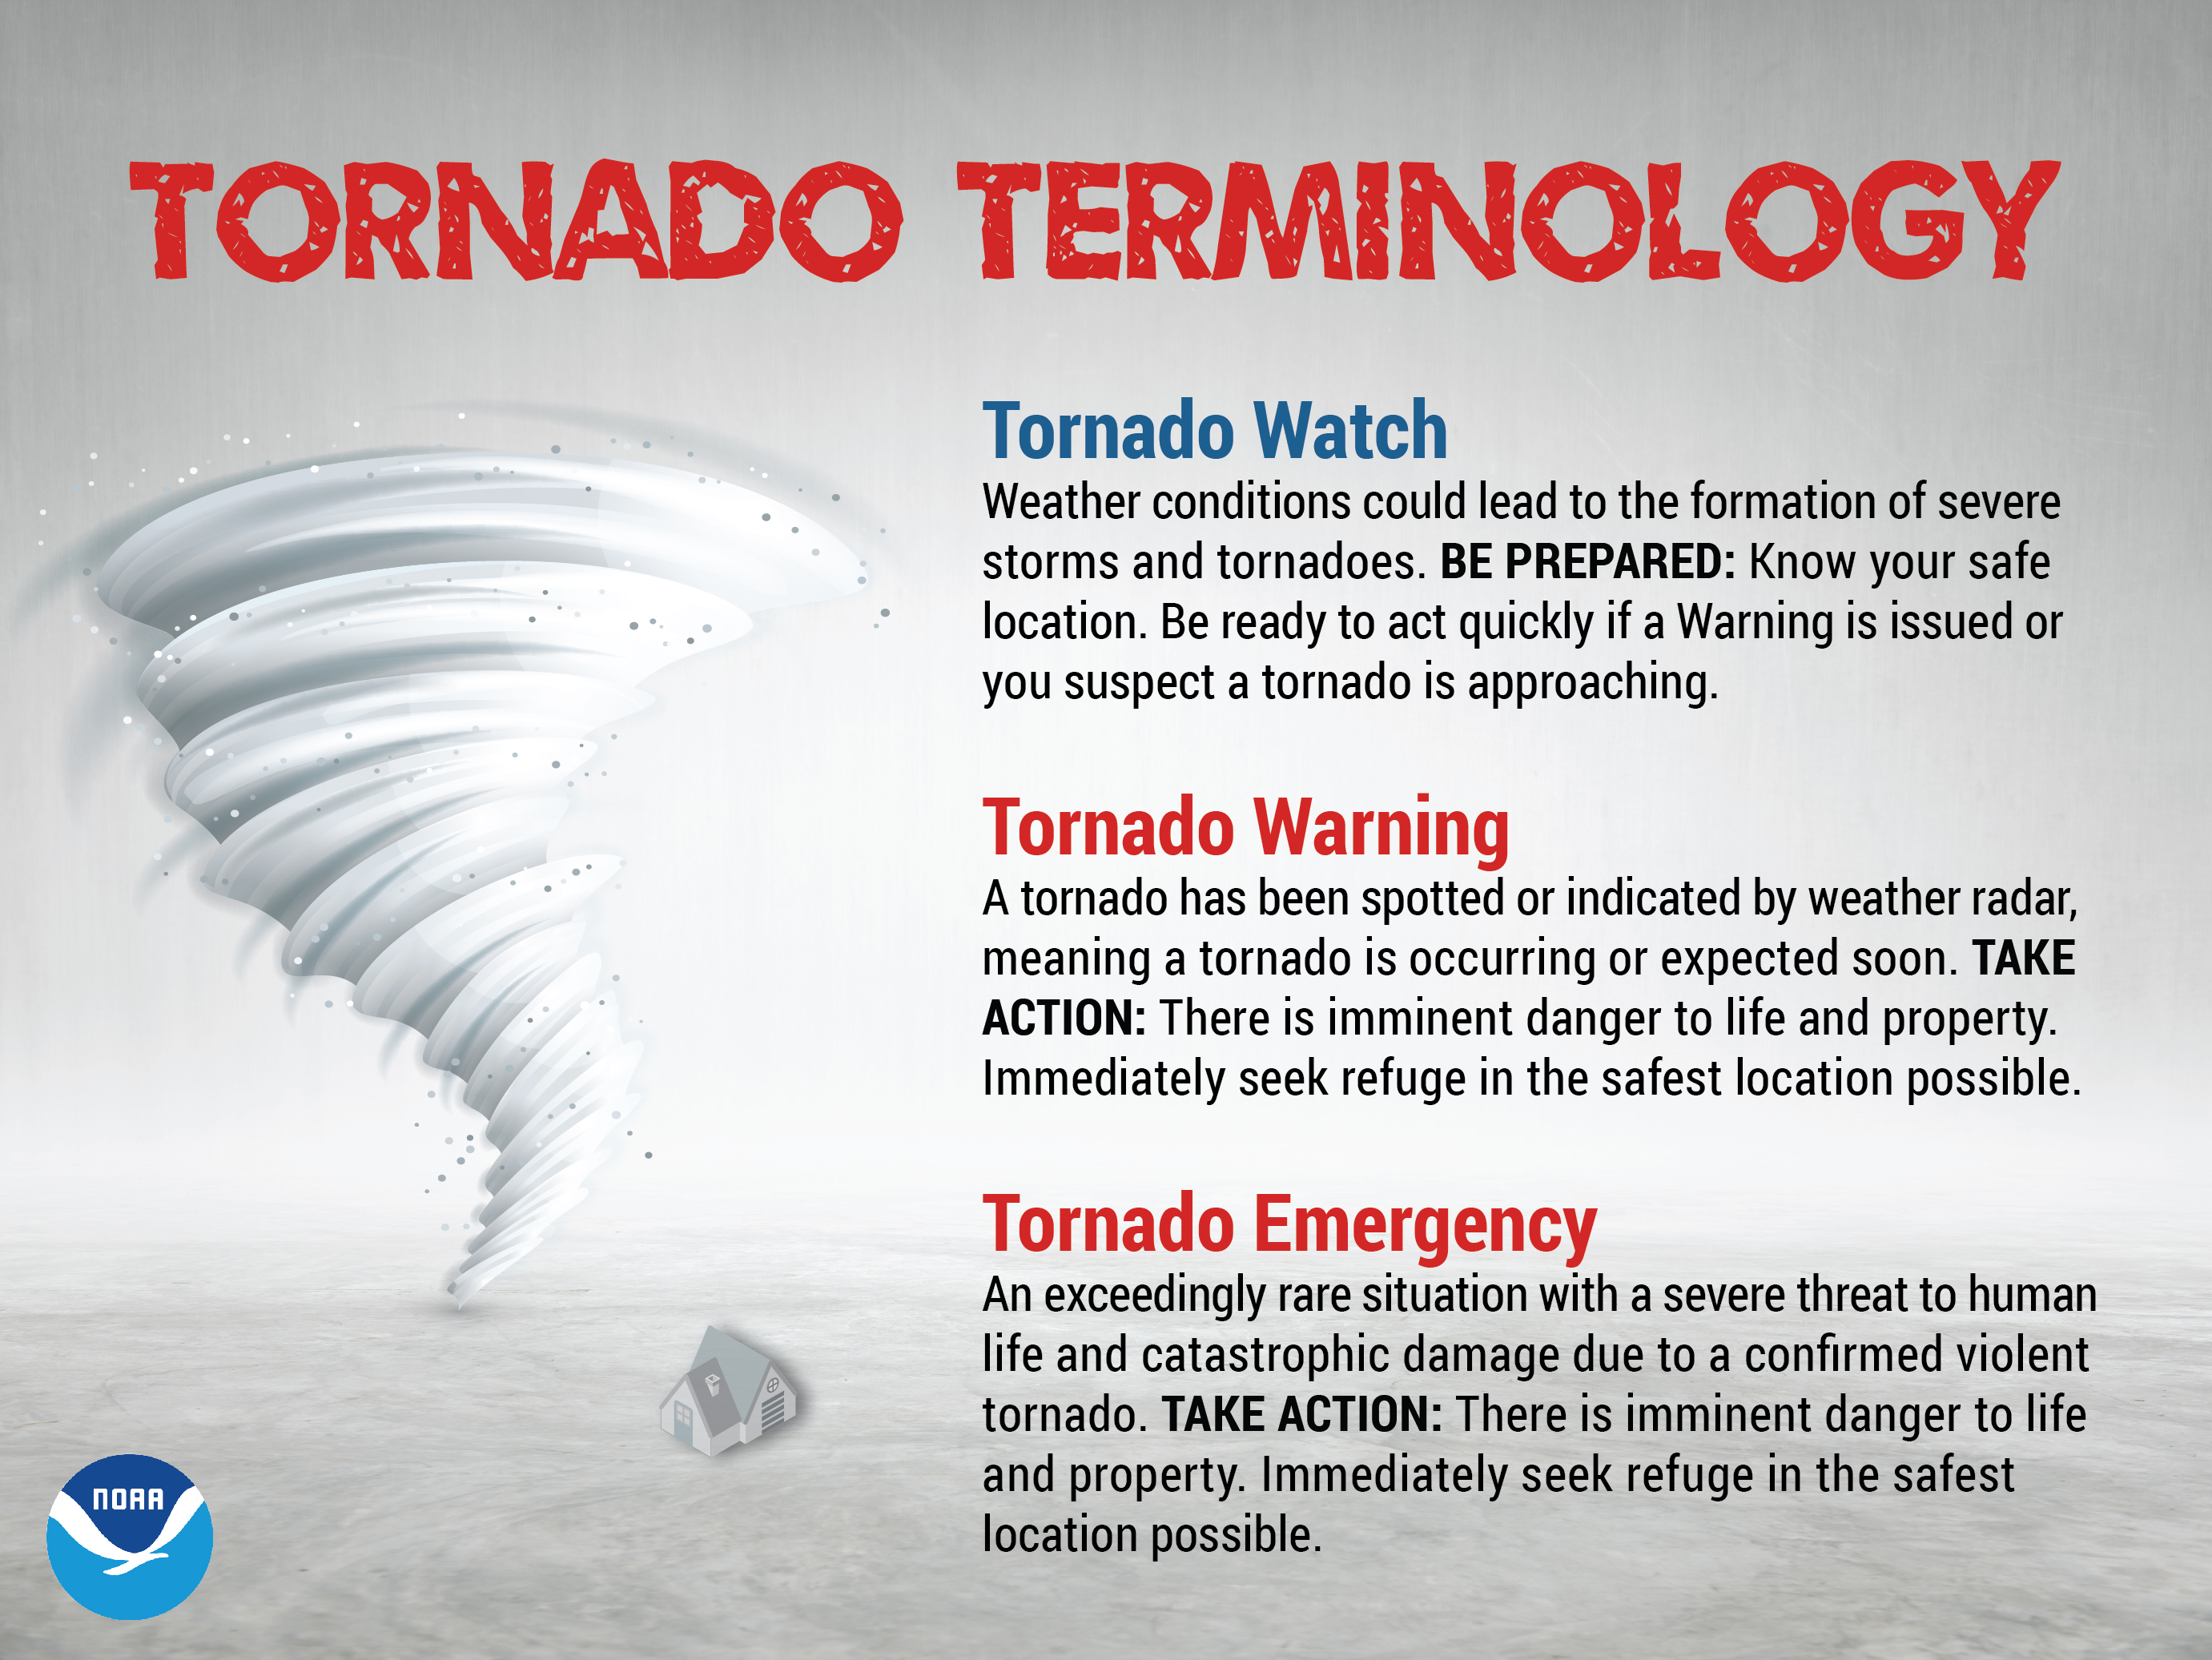 Tornado Terminology. Tornado Watch means weather conditions can lead to the formation of severe thunderstorms and tornadoes. Be prepared and know your safe place. Be ready to act quickly if a Warning is issued or if you suspect a tornado is approaching. Tornado Warning means that a tornado has been observed or indicated by weather radar so a tornado is occurring or expected soon. Take action. There is an imminent danger to life and property. Seek shelter immediately in the safest place possible. Tornado Emergency is an extremely rare situation with serious danger to life and catastrophic damage due to a confirmed violent tornado. Take action. There is an imminent danger to life and property. Seek shelter immediately in the safest place possible.